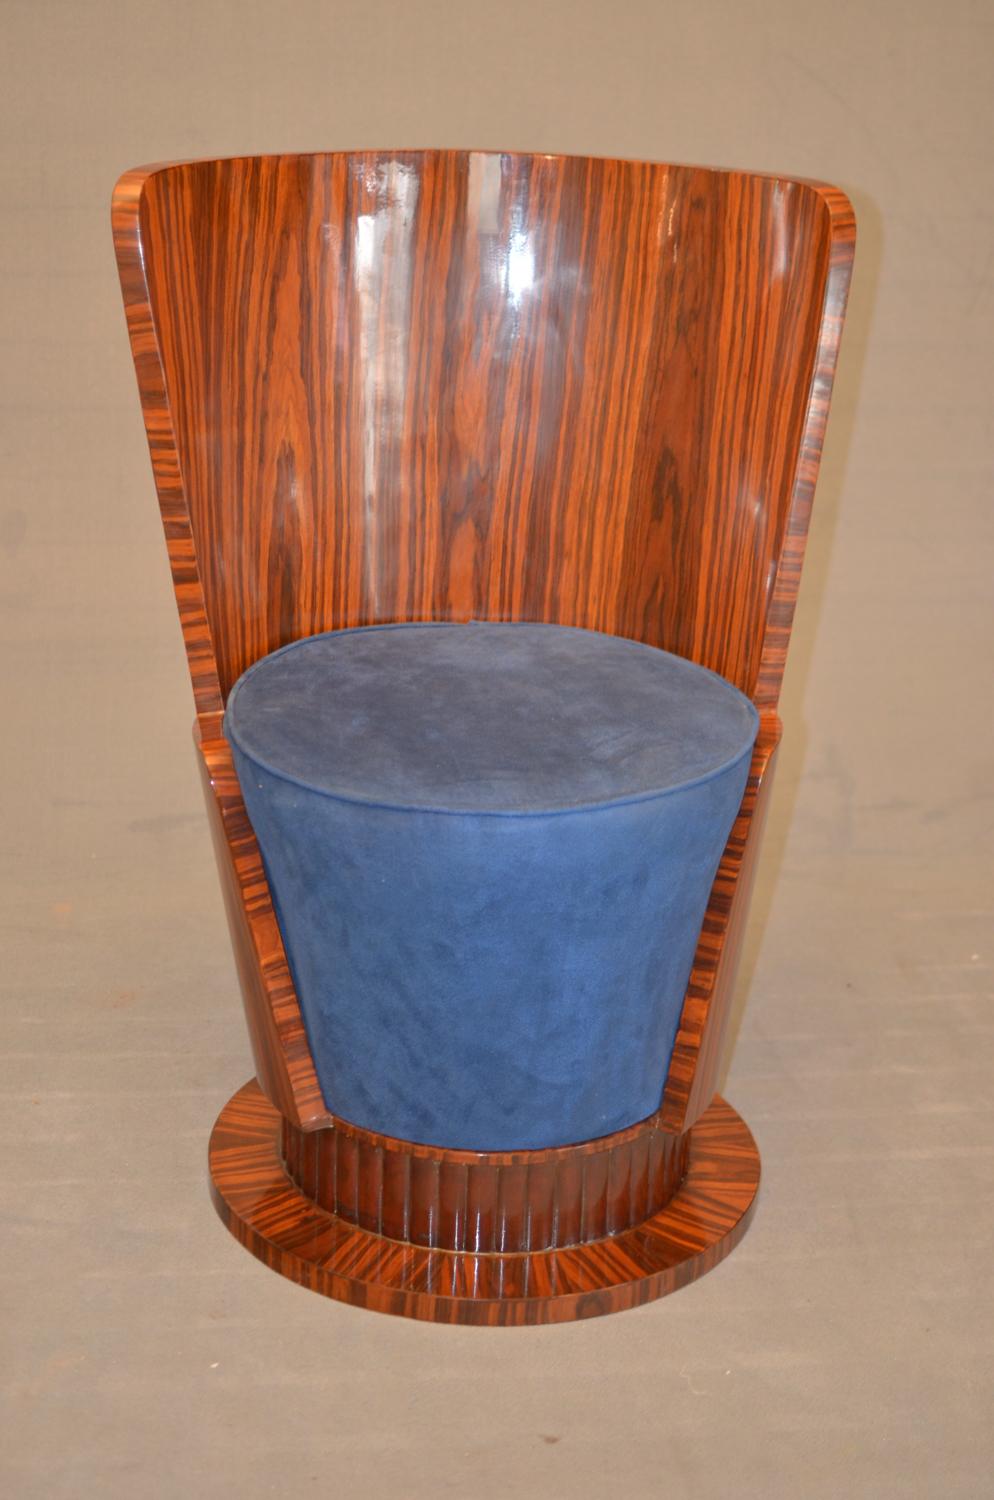 Cylinder armchair in Art Deco style of French origin of 1925 in dark rosewood. The armchair has a high back and a seat in blue velvet.